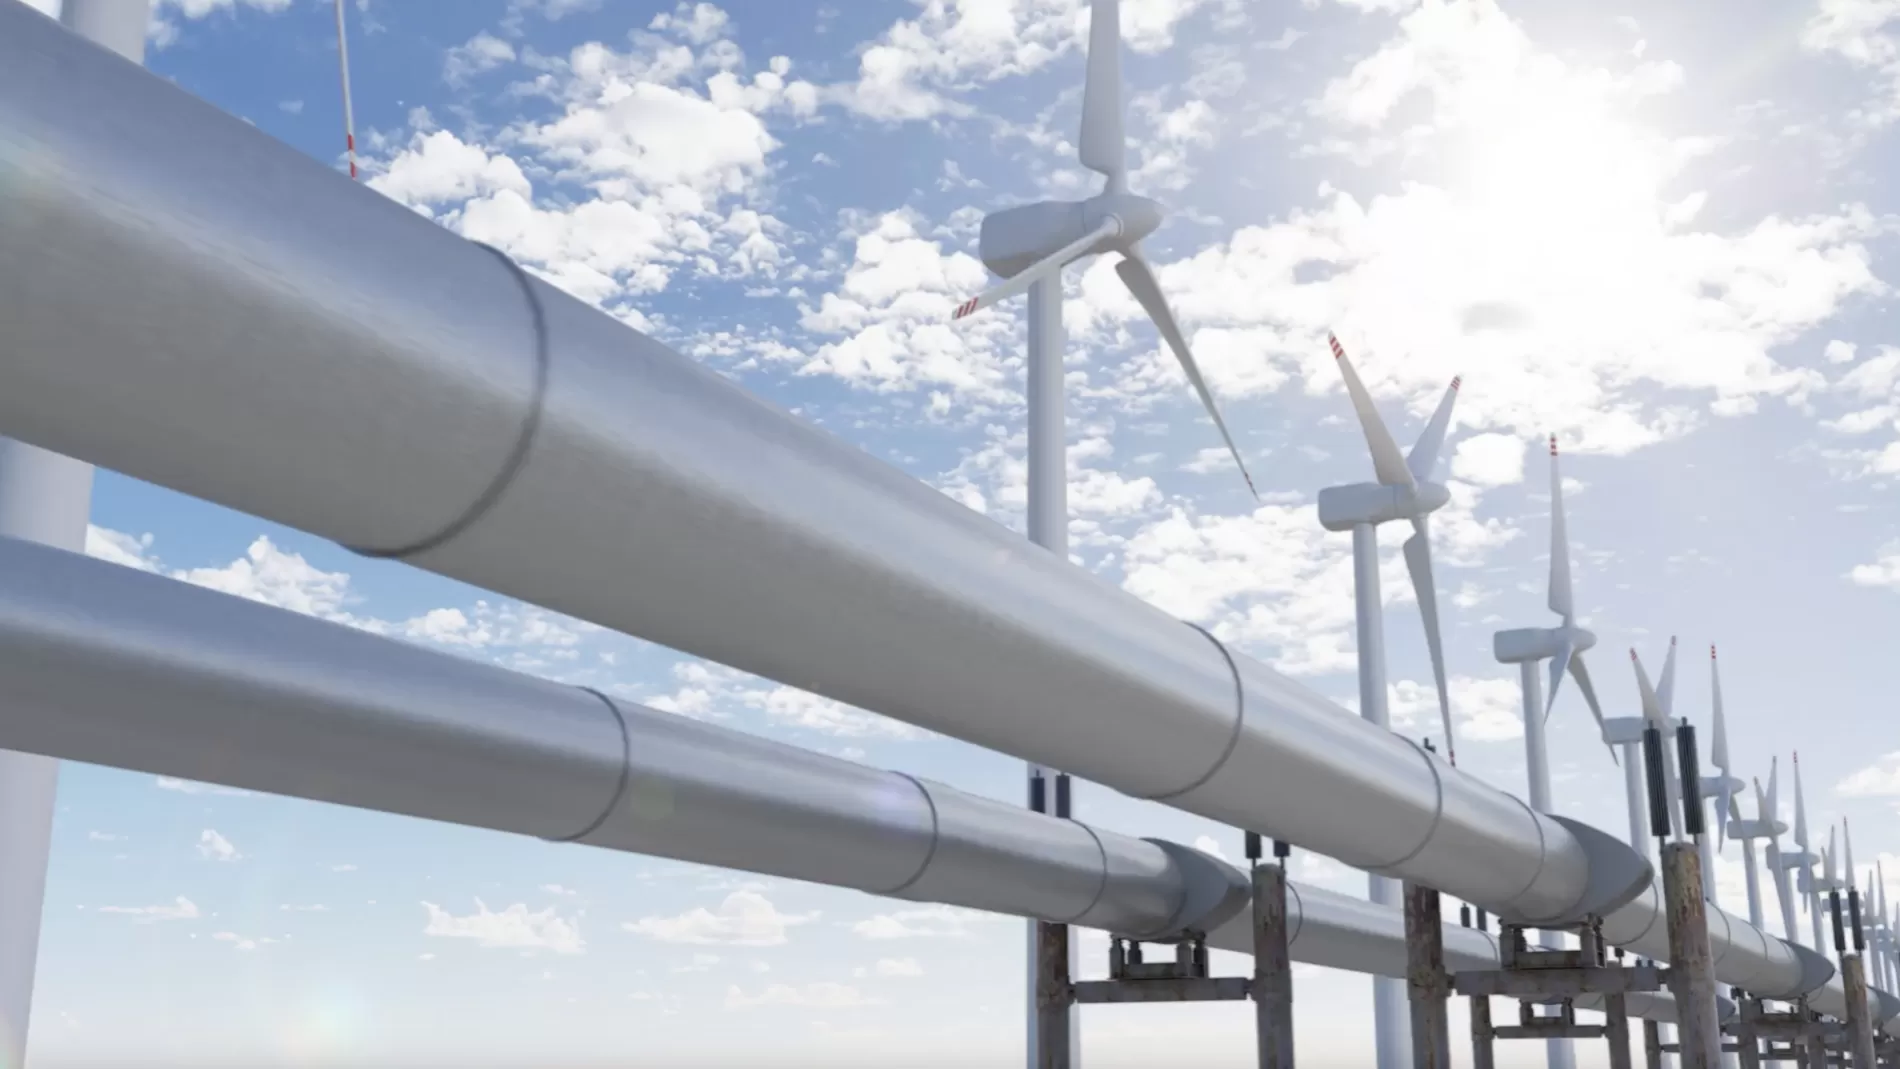 image of pipeline connected to wind turbines